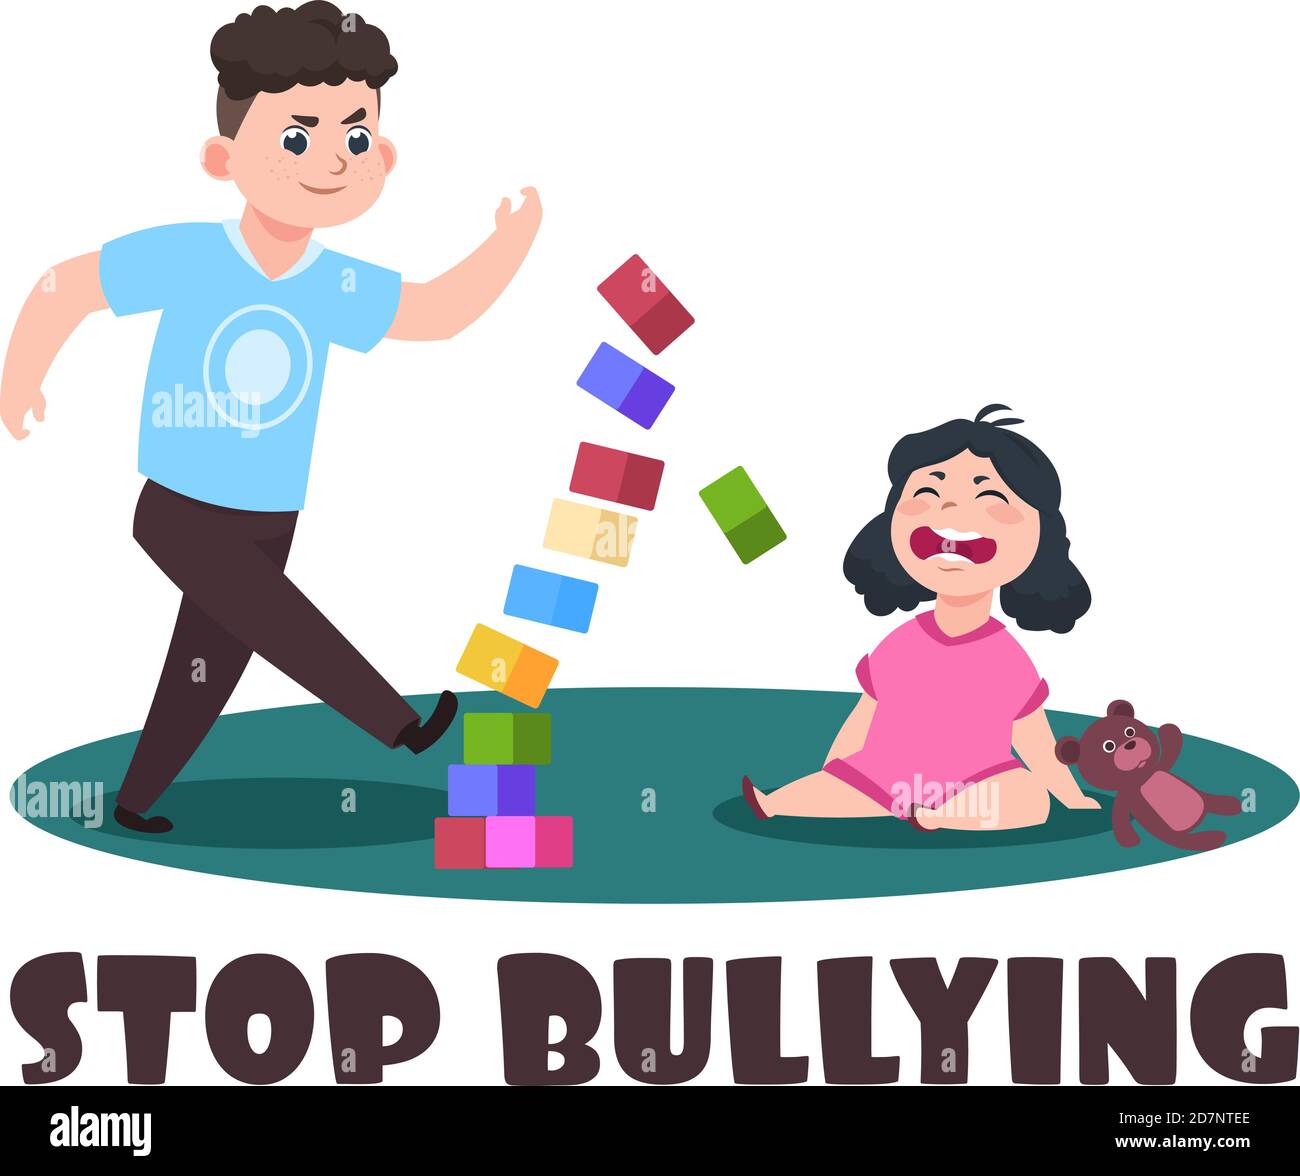 Angry kids. Bad boy and crying little girl. Stop bullying vector illustration. Bully boy has conflict with crying girl Stock Vector